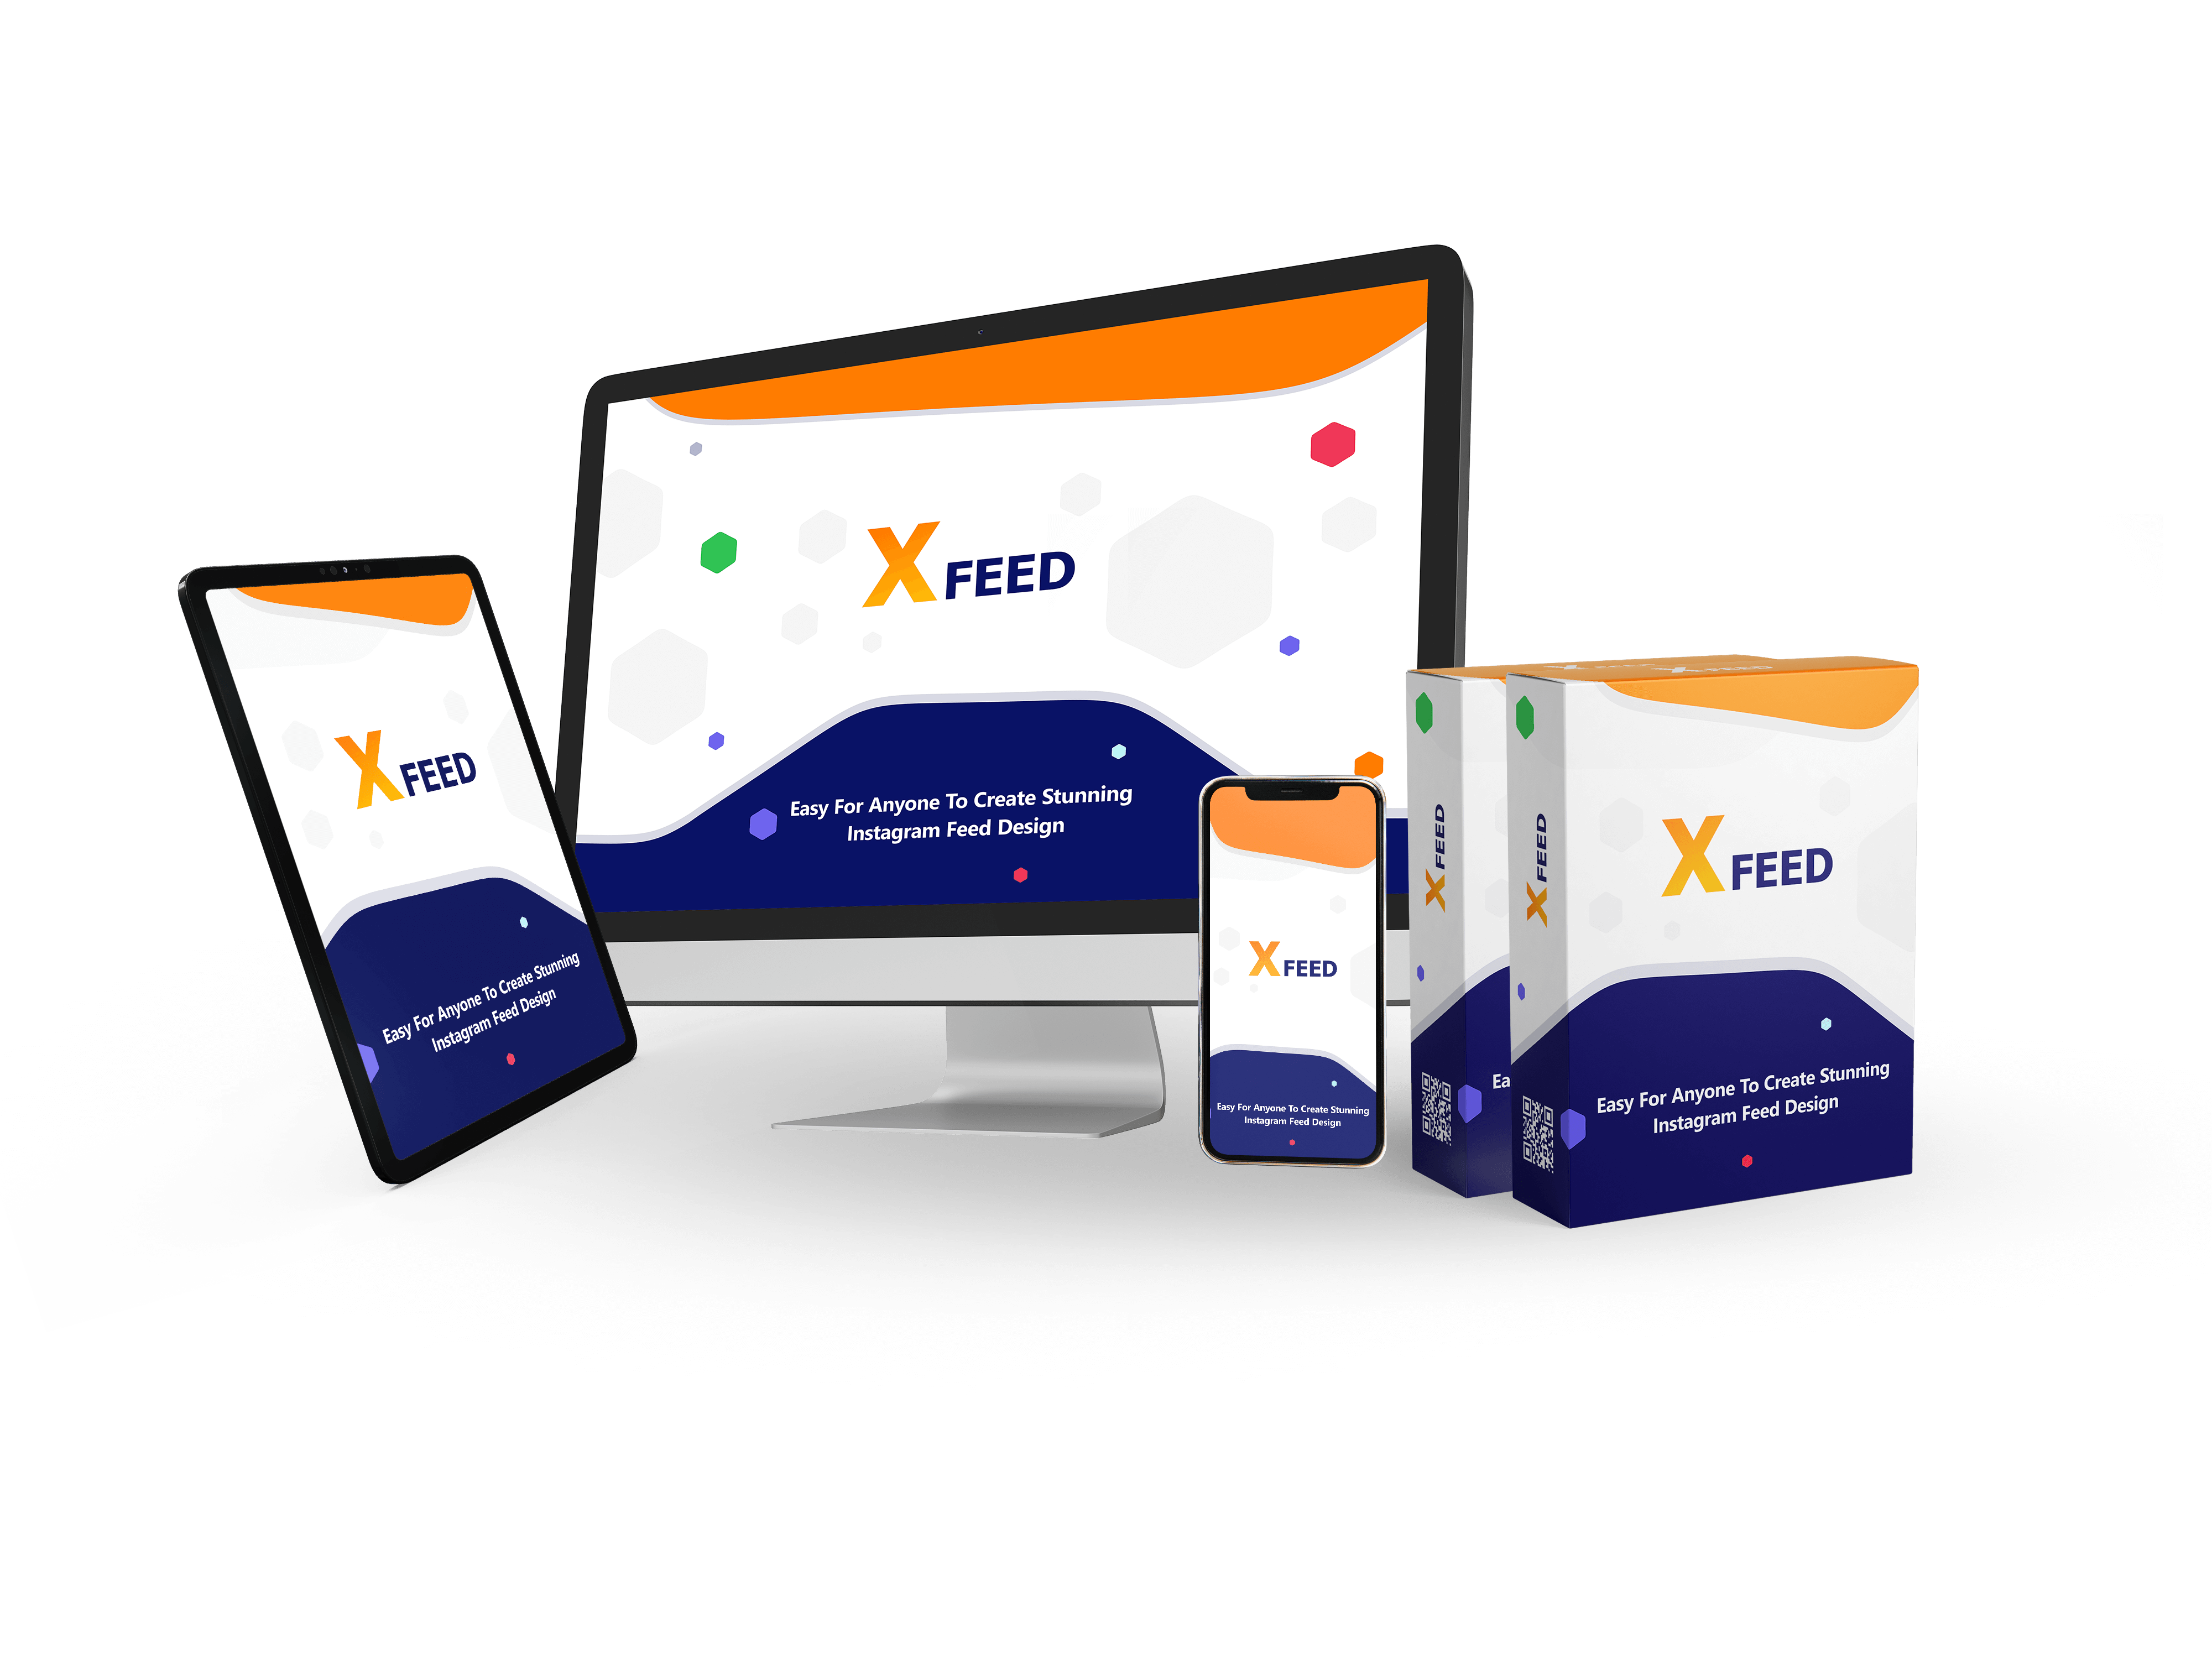 [GET] XFeed + OTO’s Free Download